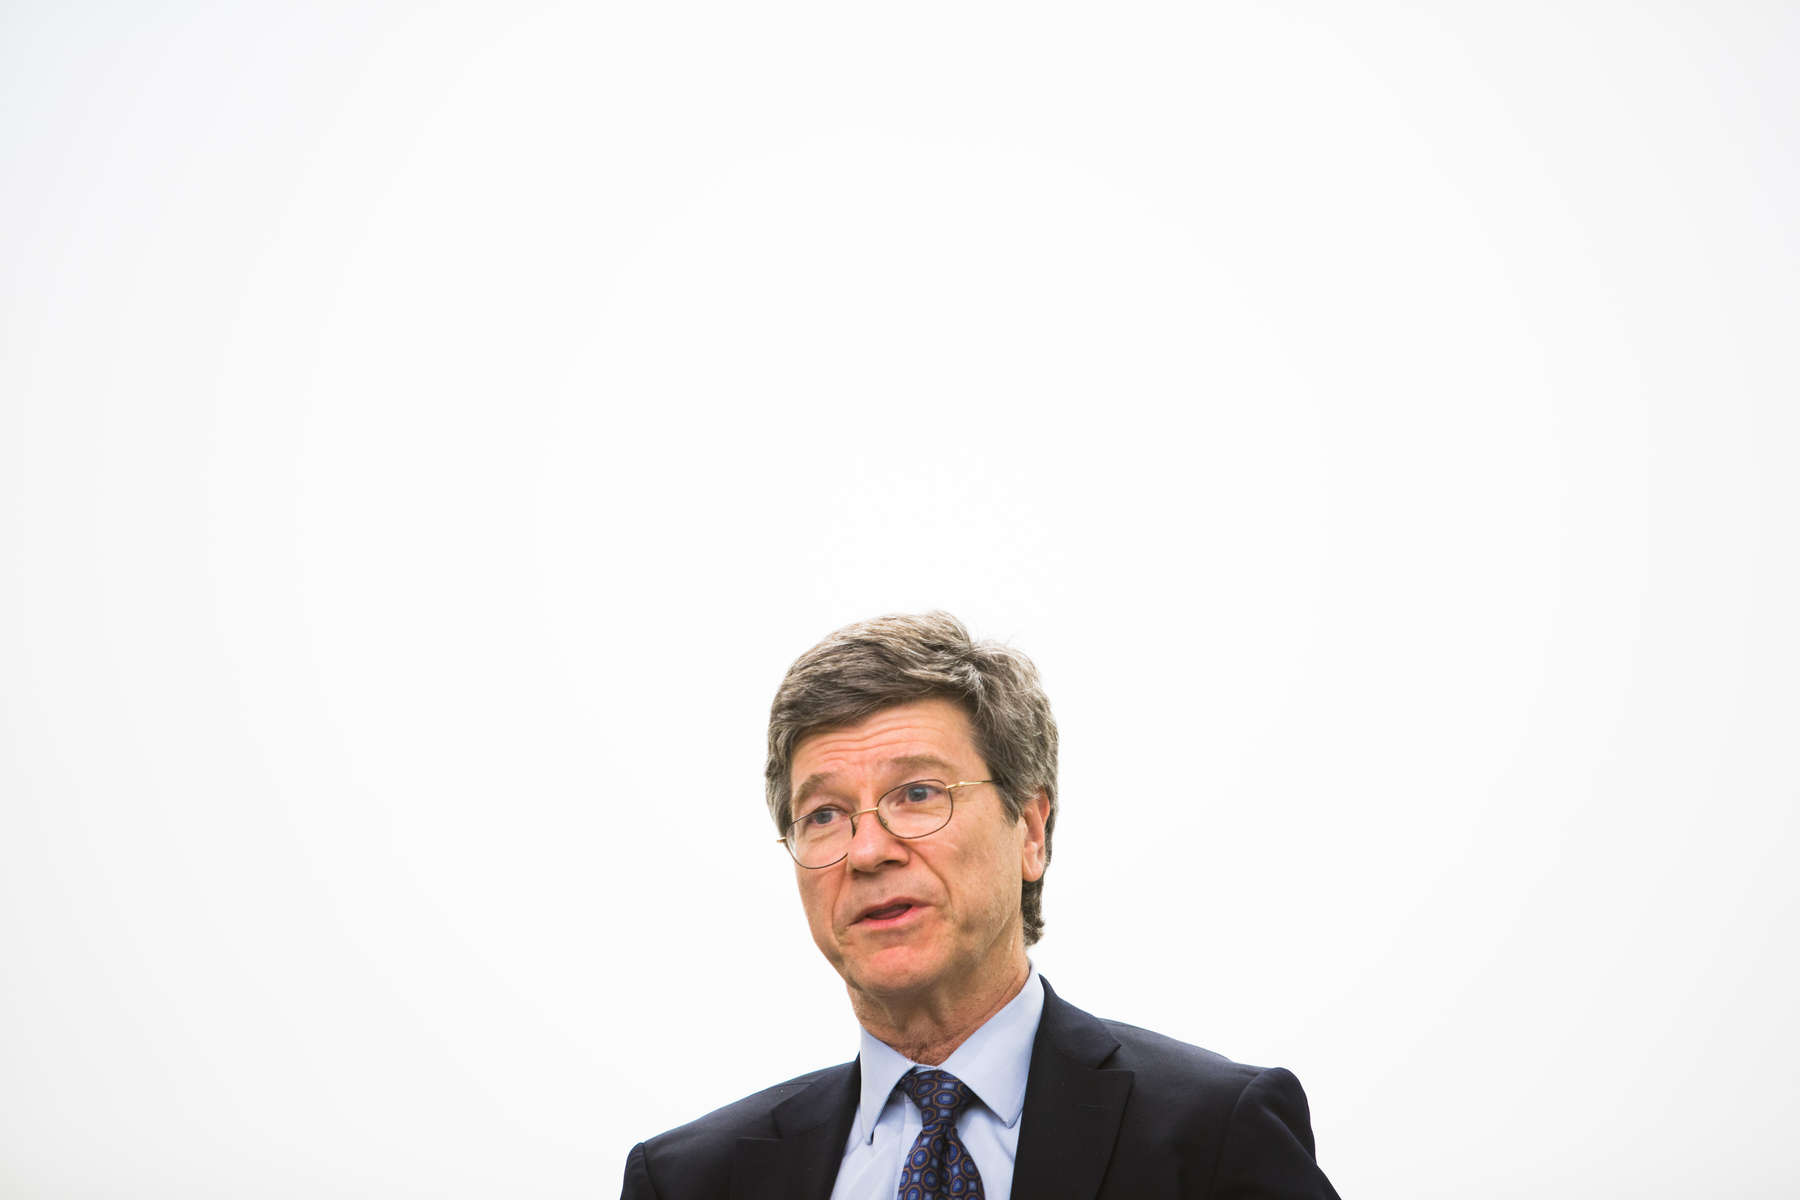 Professor, Economist and Director, Earth Institute at Columbia University, Jeffrey Sachs, speaks at a Paul and Daisy Soros Fellowship for New American's event. 